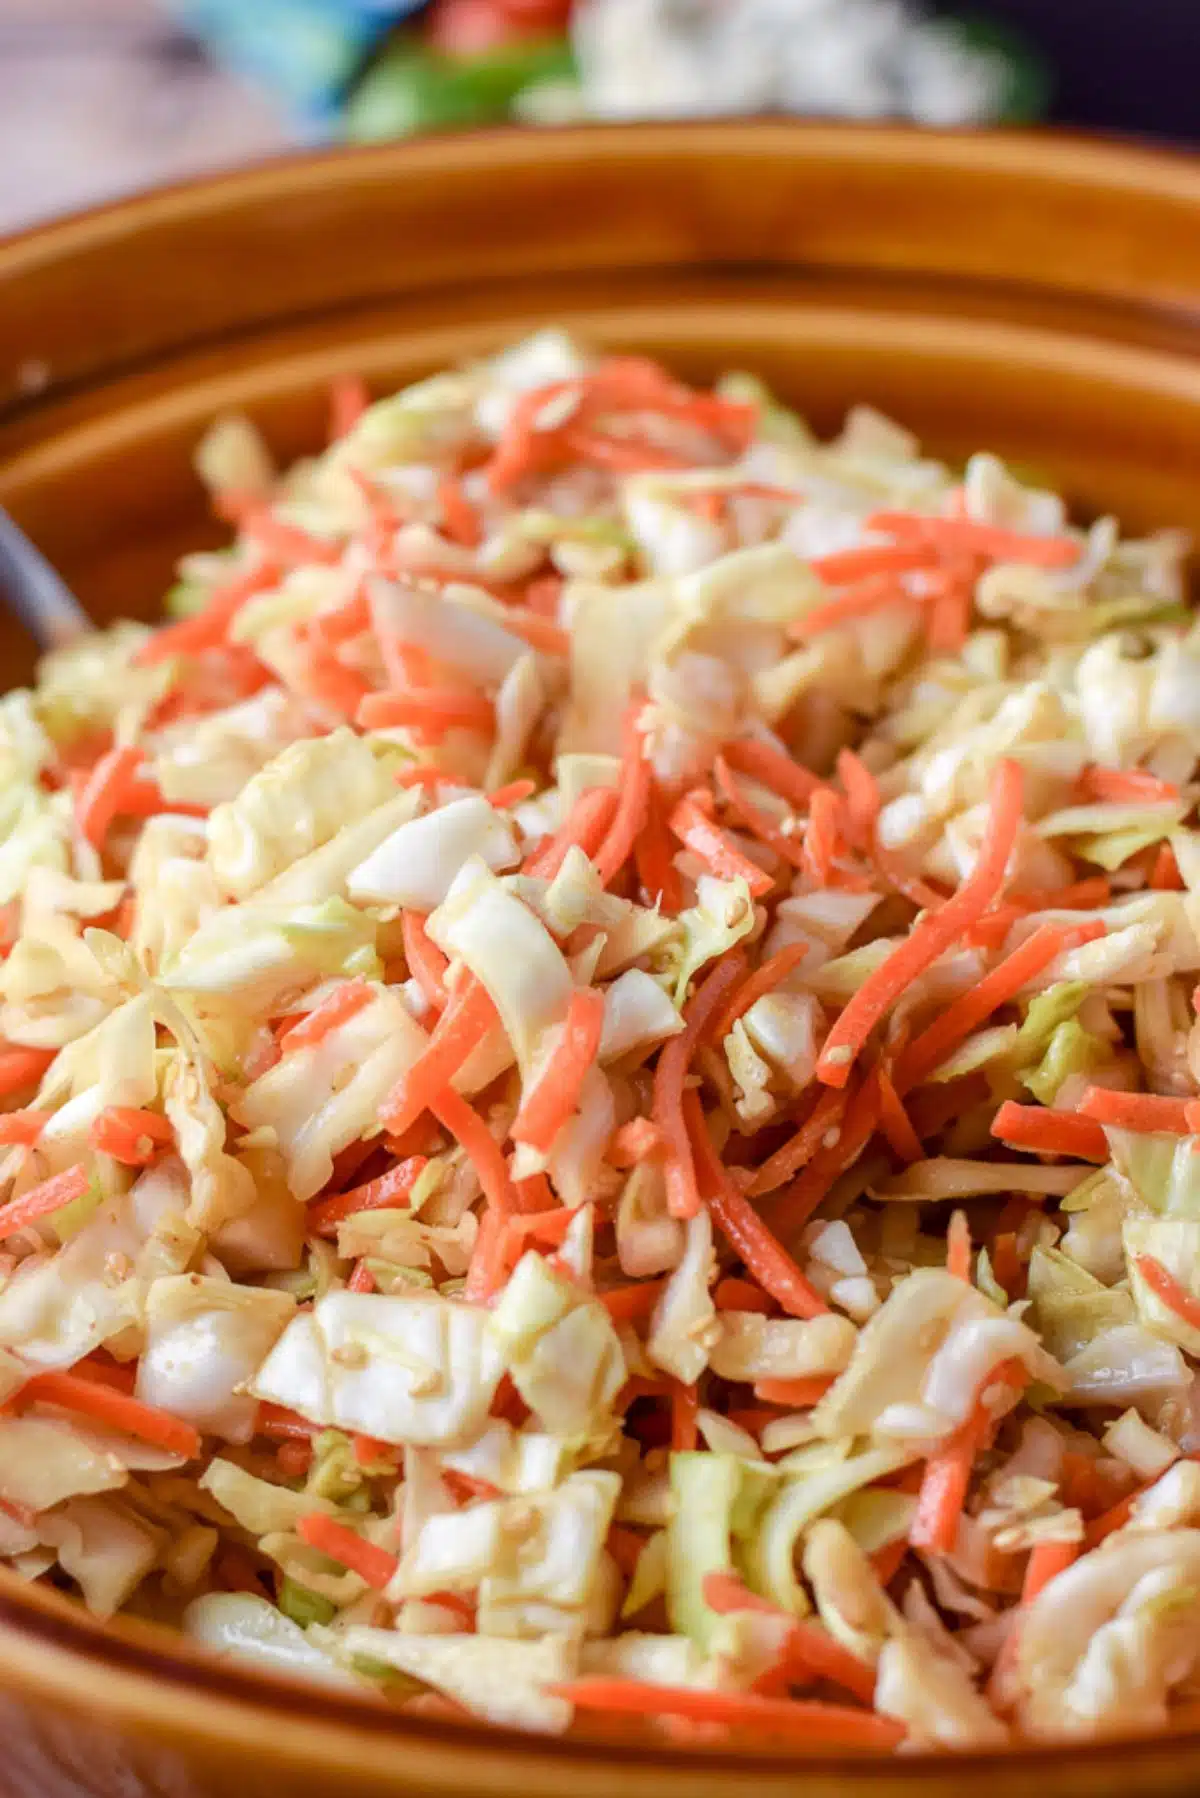 Close up of the coleslaw, you can see the sesame seeds and sauce